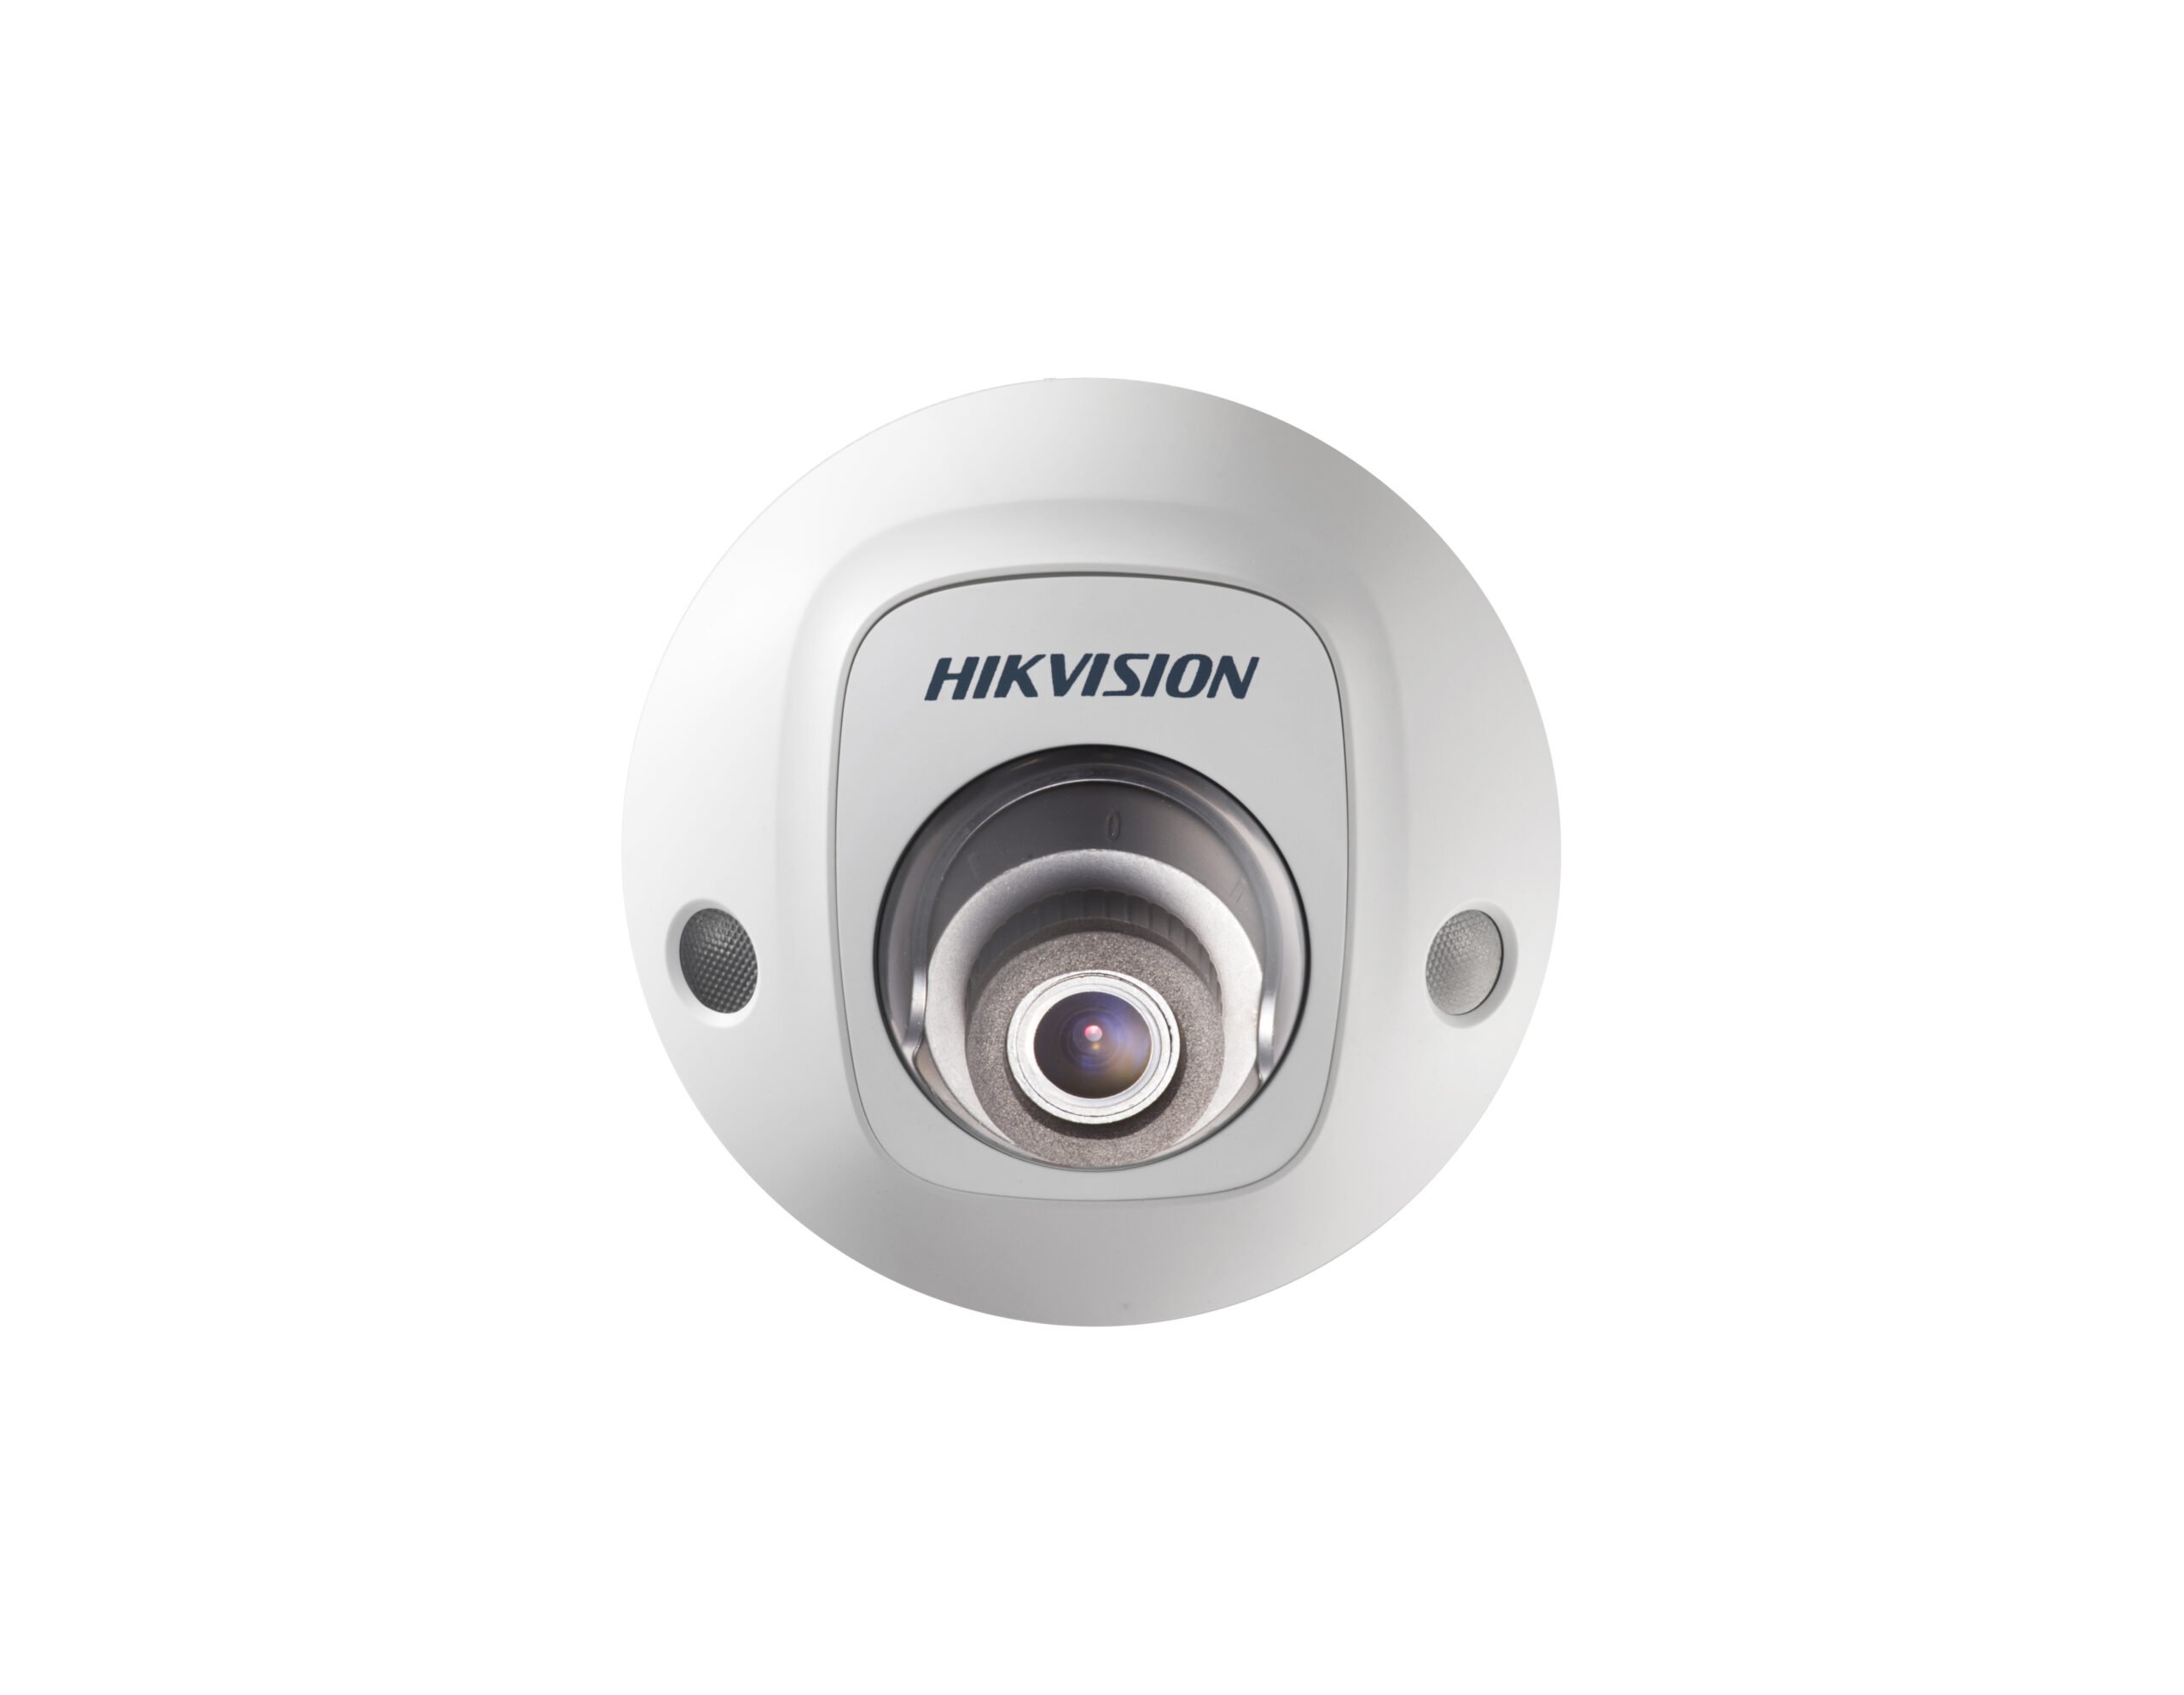 Hikvision DS-2CD2525FWD-IS